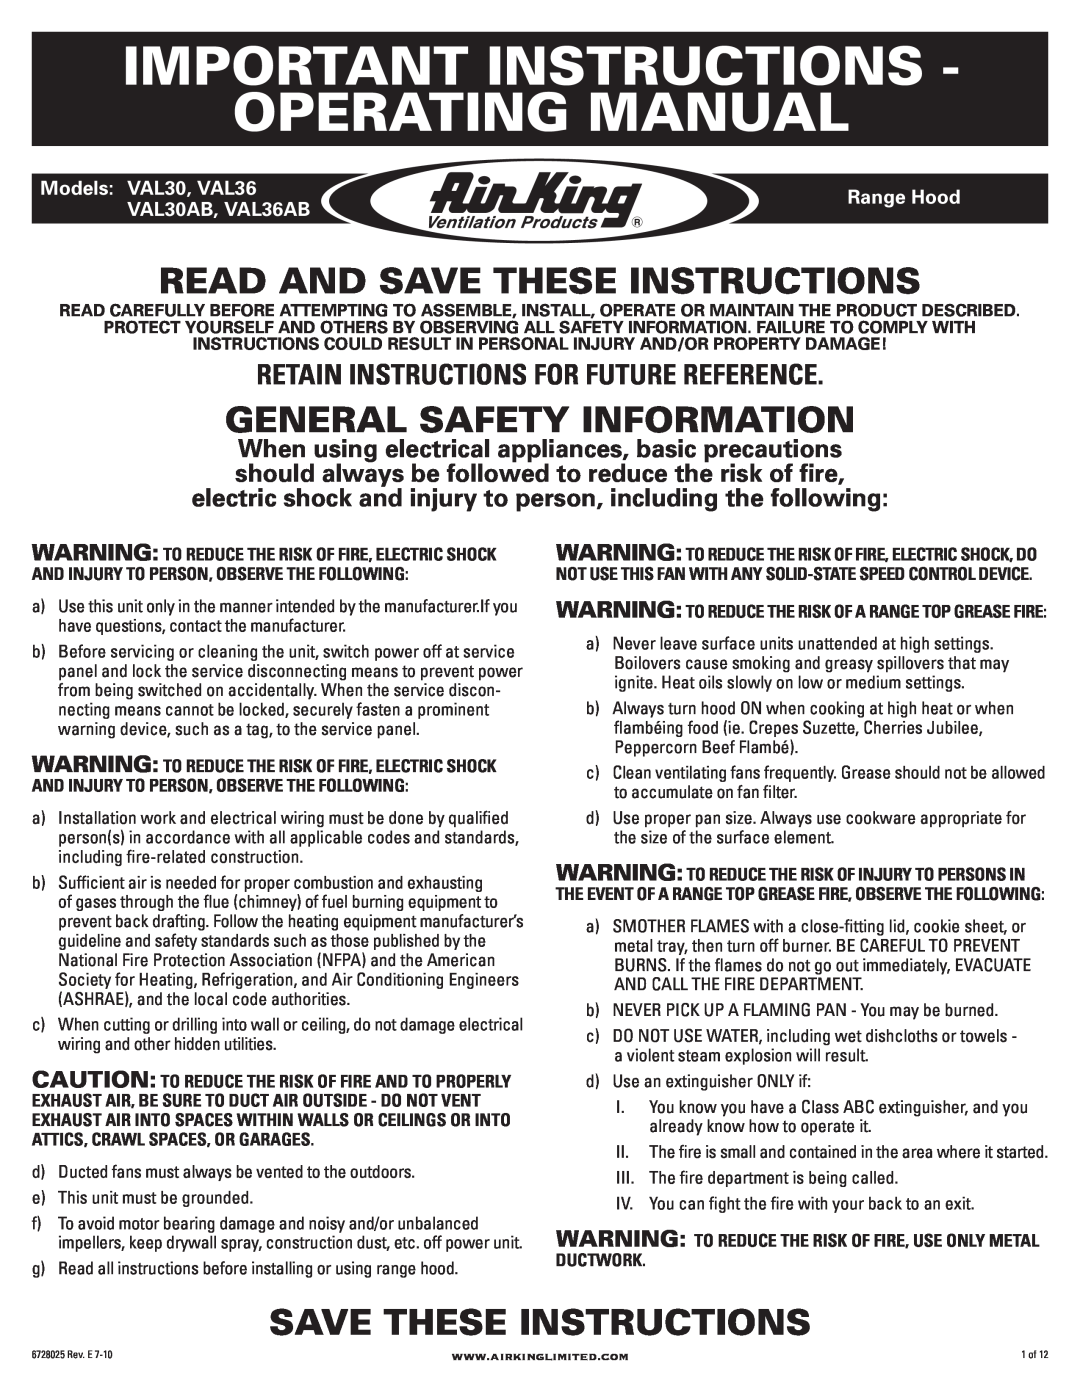 Air King VAL36AB manual Important Instructions Operating Manual, Read And Save These Instructions, Models VAL30, VAL36 